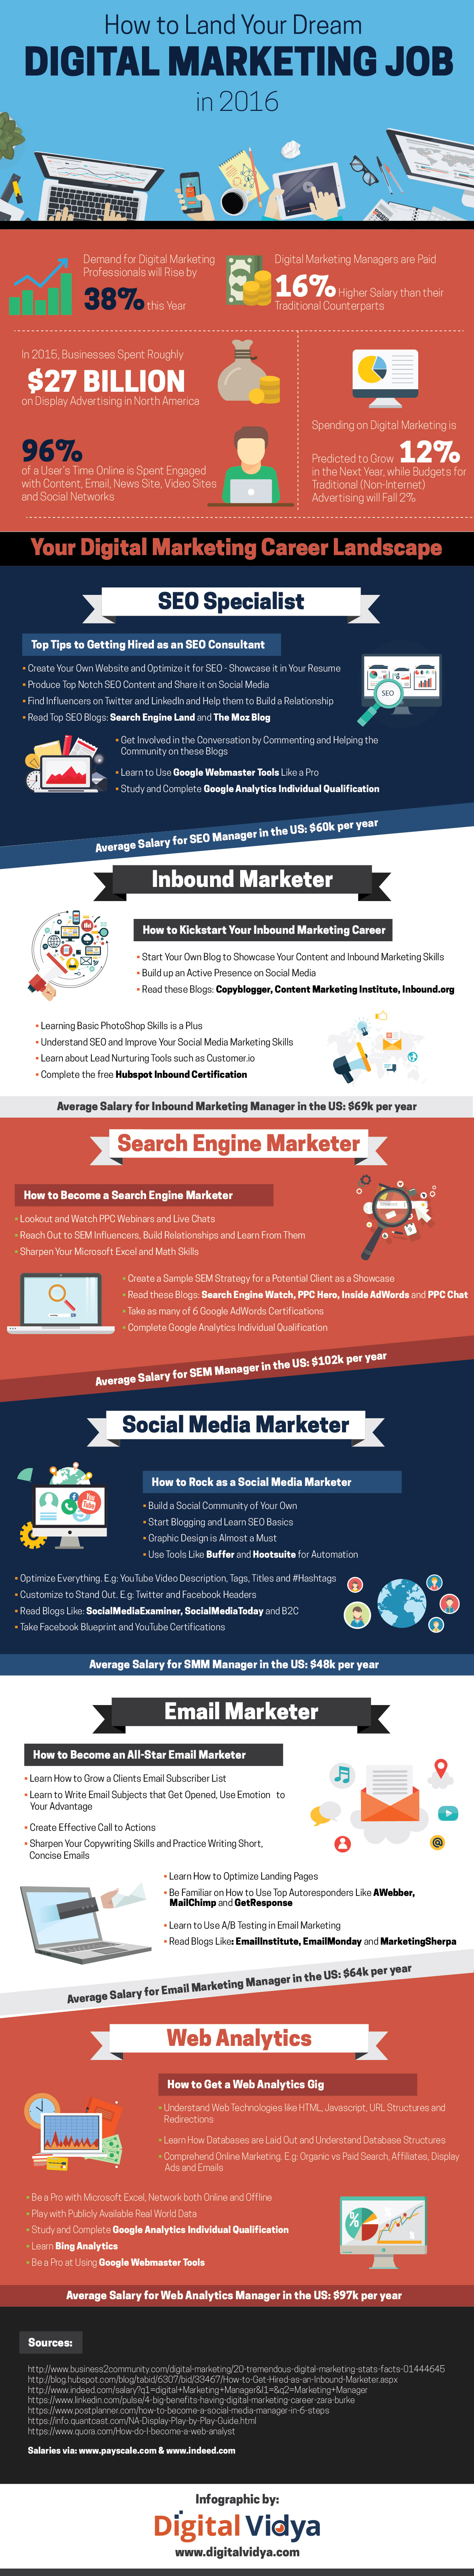 how_to_land_your_dream_digital_marketing_job_in_2016_infographic